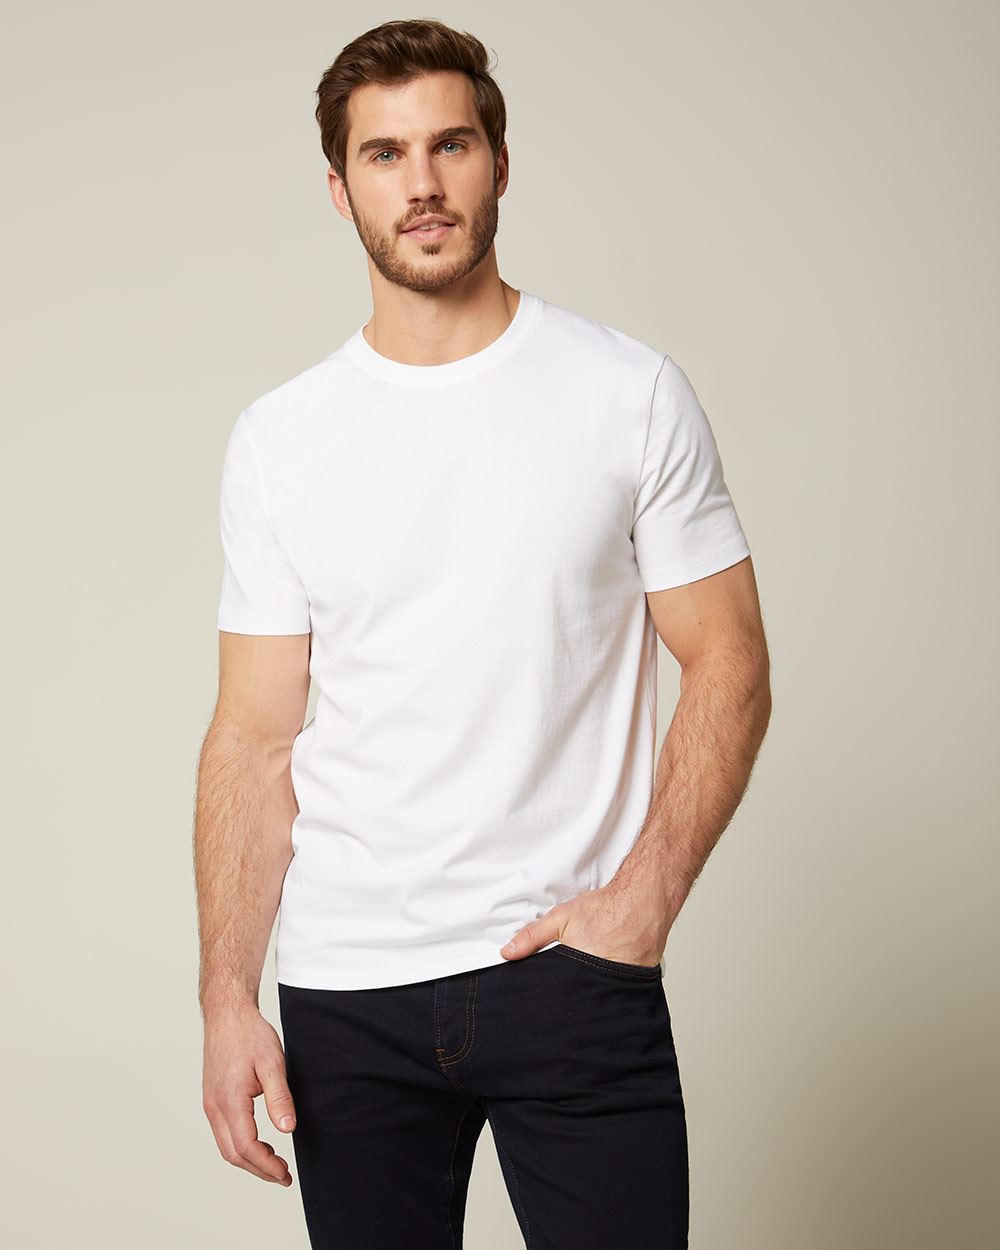 Soft touch crew-neck t-shirt | RW&CO.